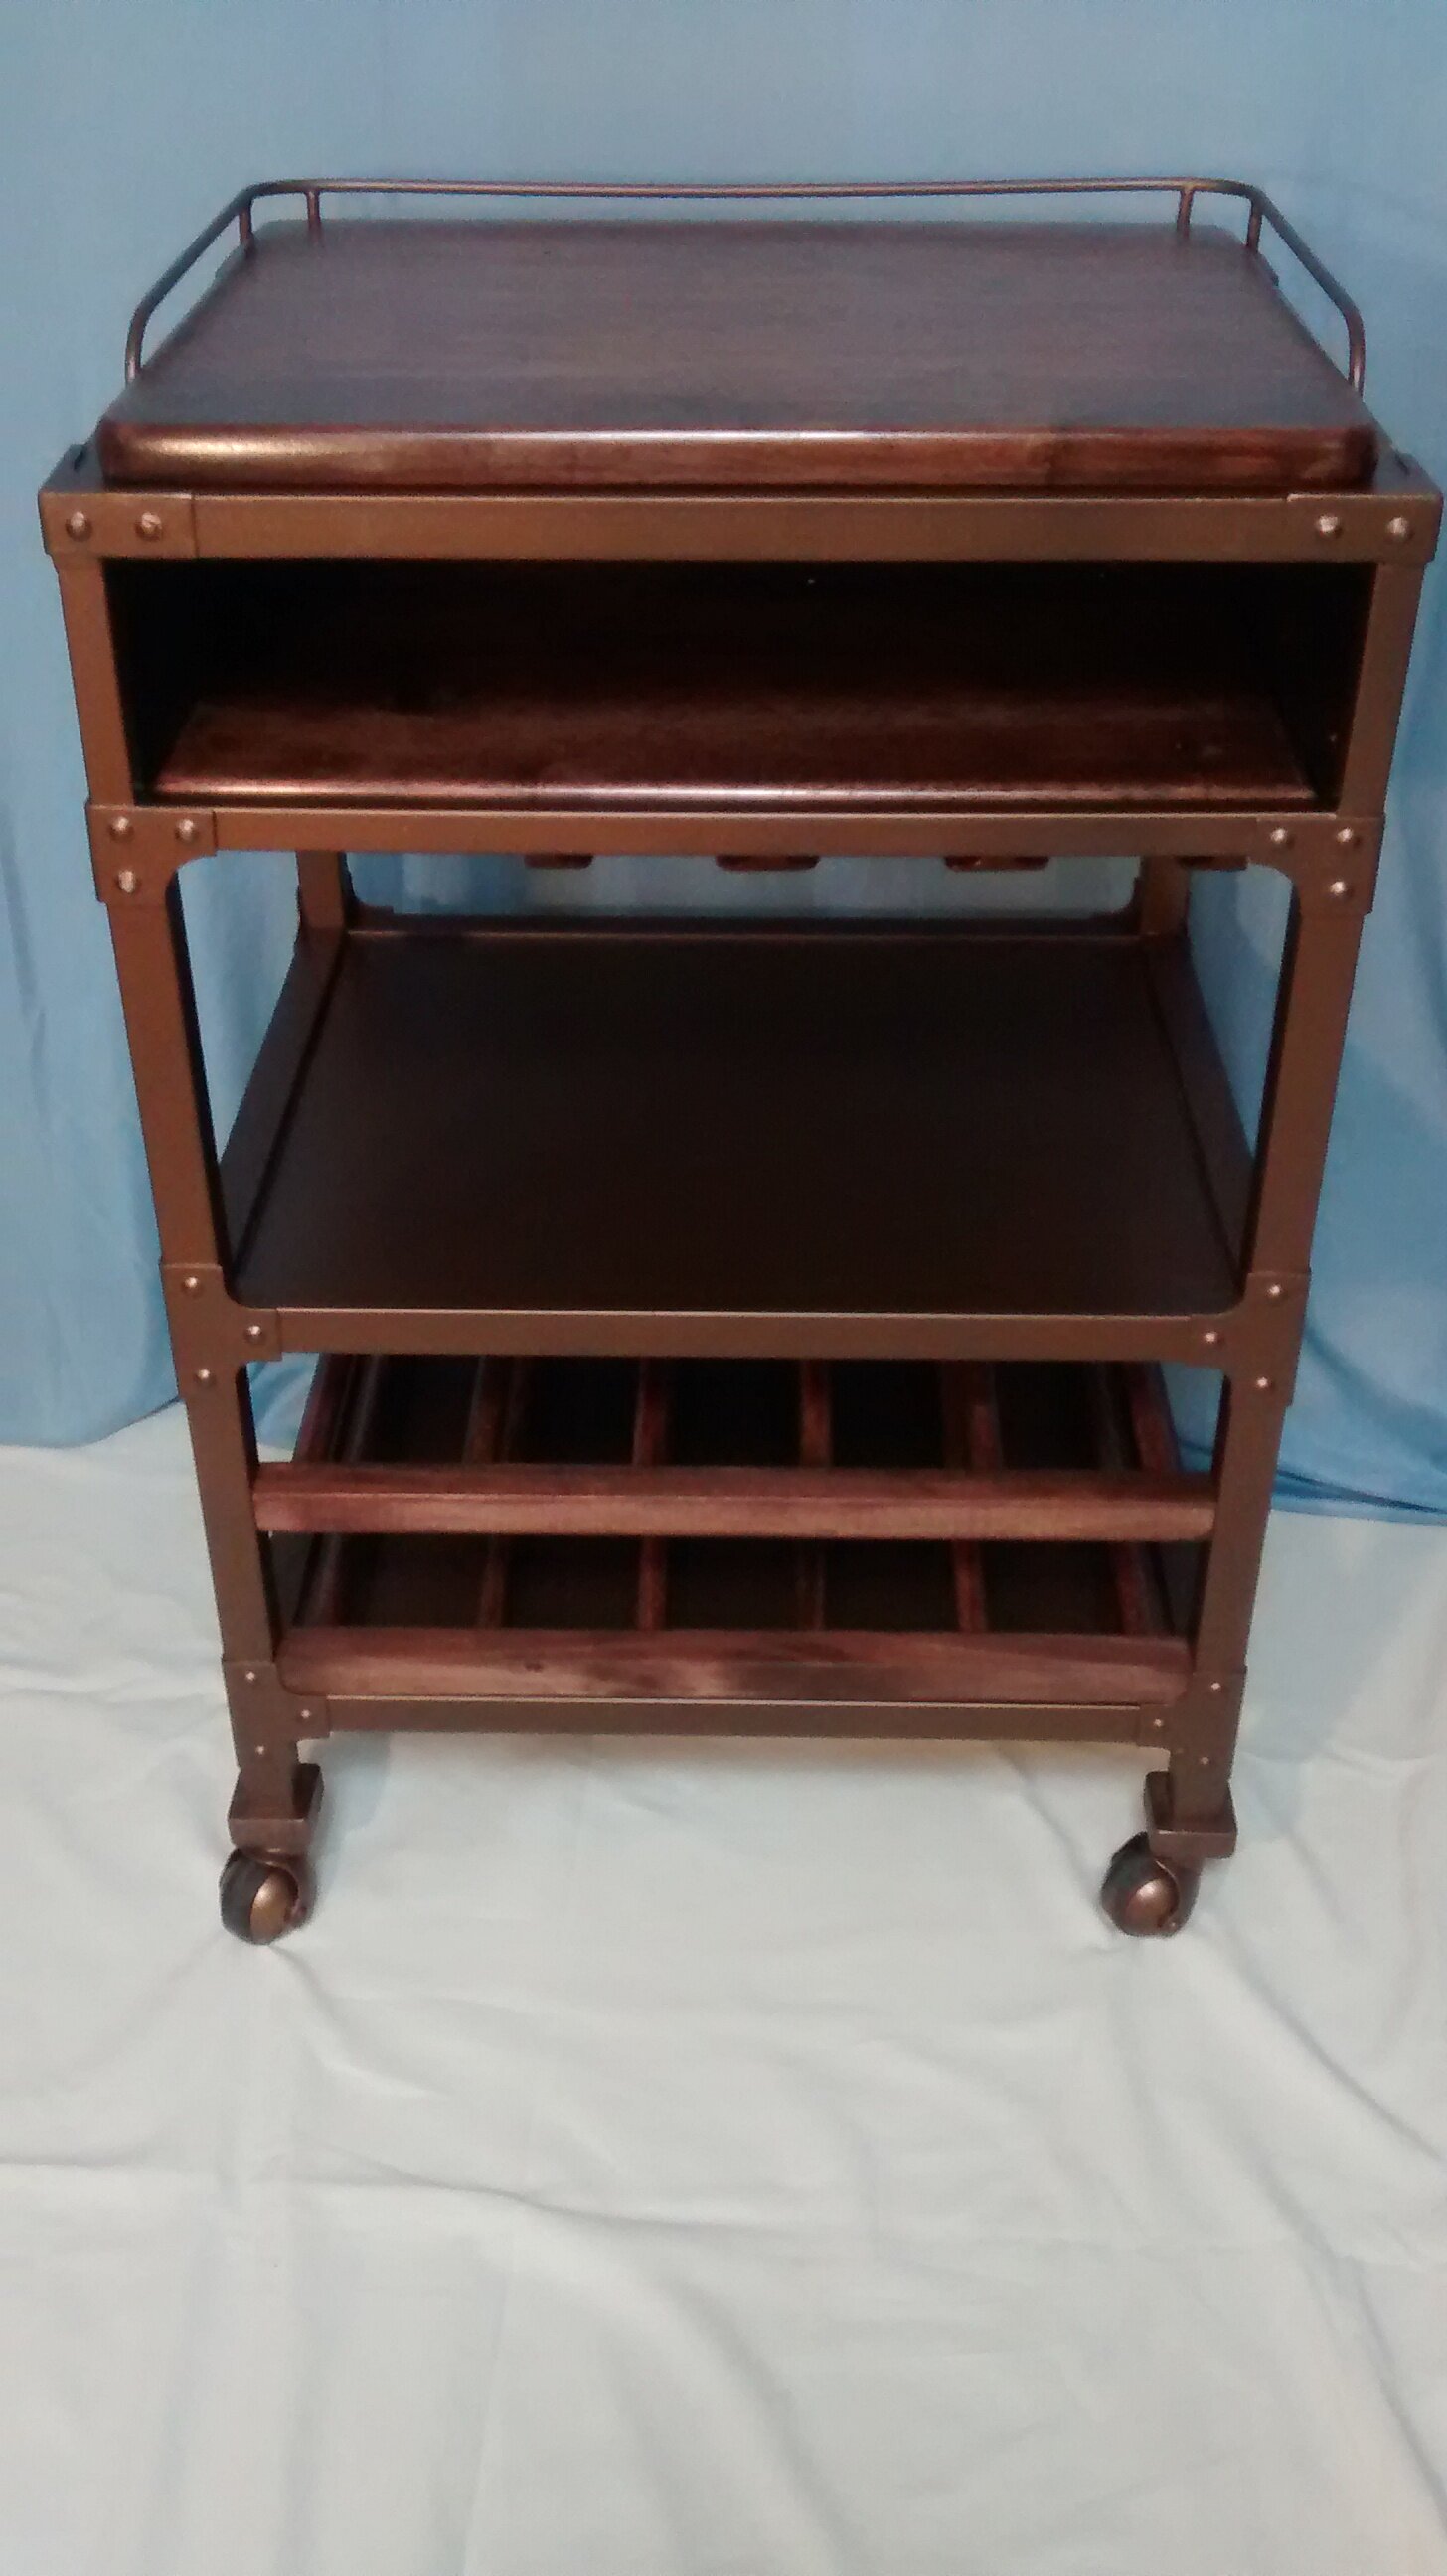 Compact Metal Wine Bar Cart with Reclaimed Wood Shelves